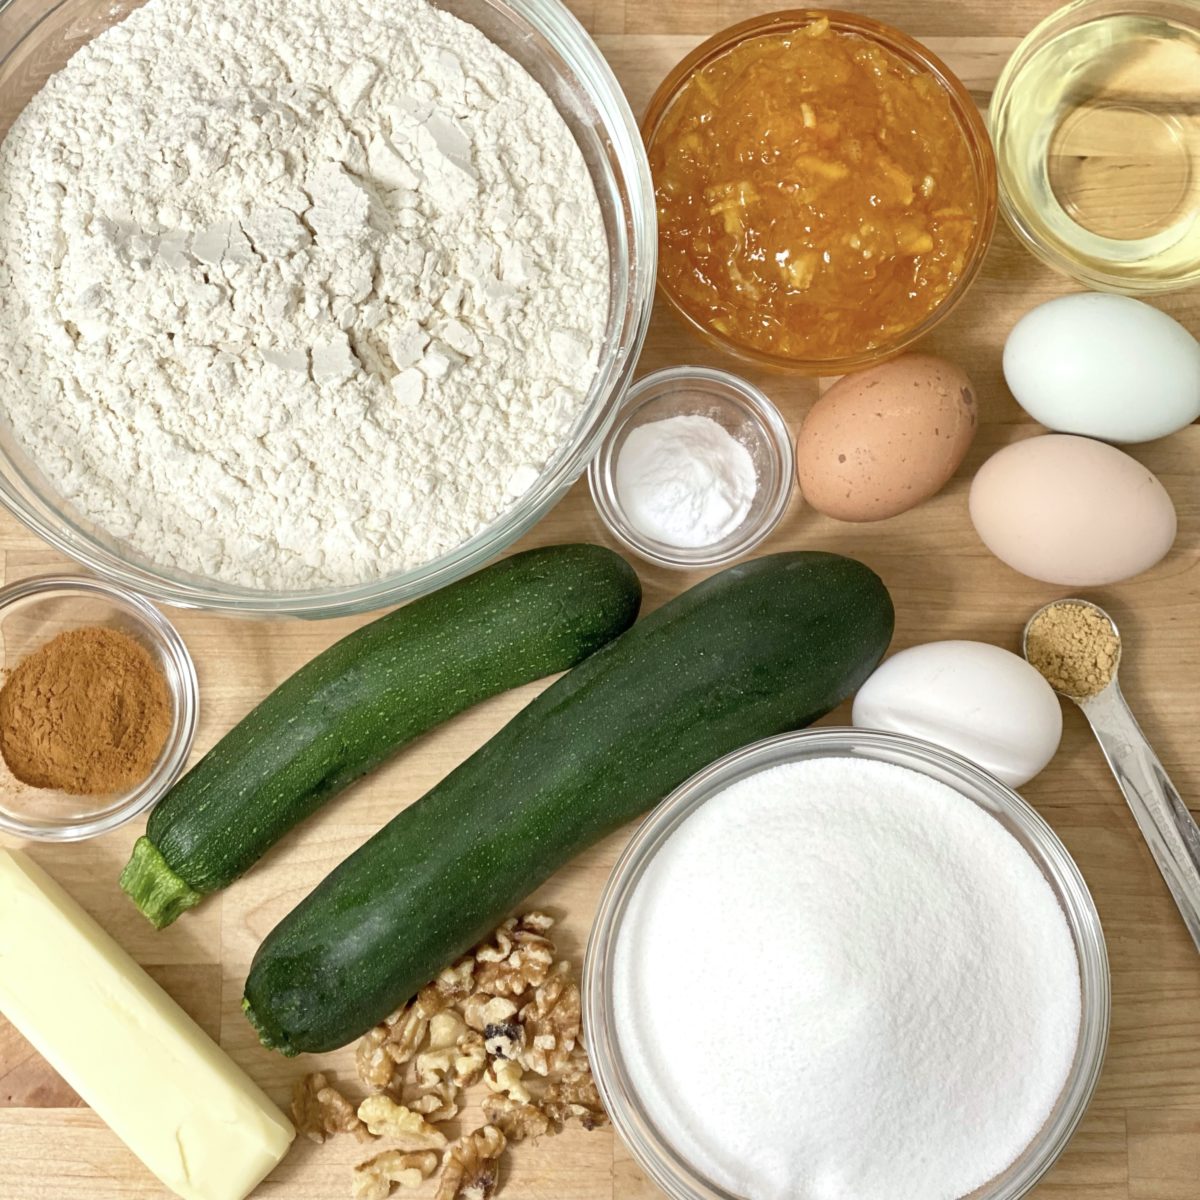 Ingredients in flowerpot zucchini bread including zucchini, flour, sugar, eggs, butter, cinnamon, and more.